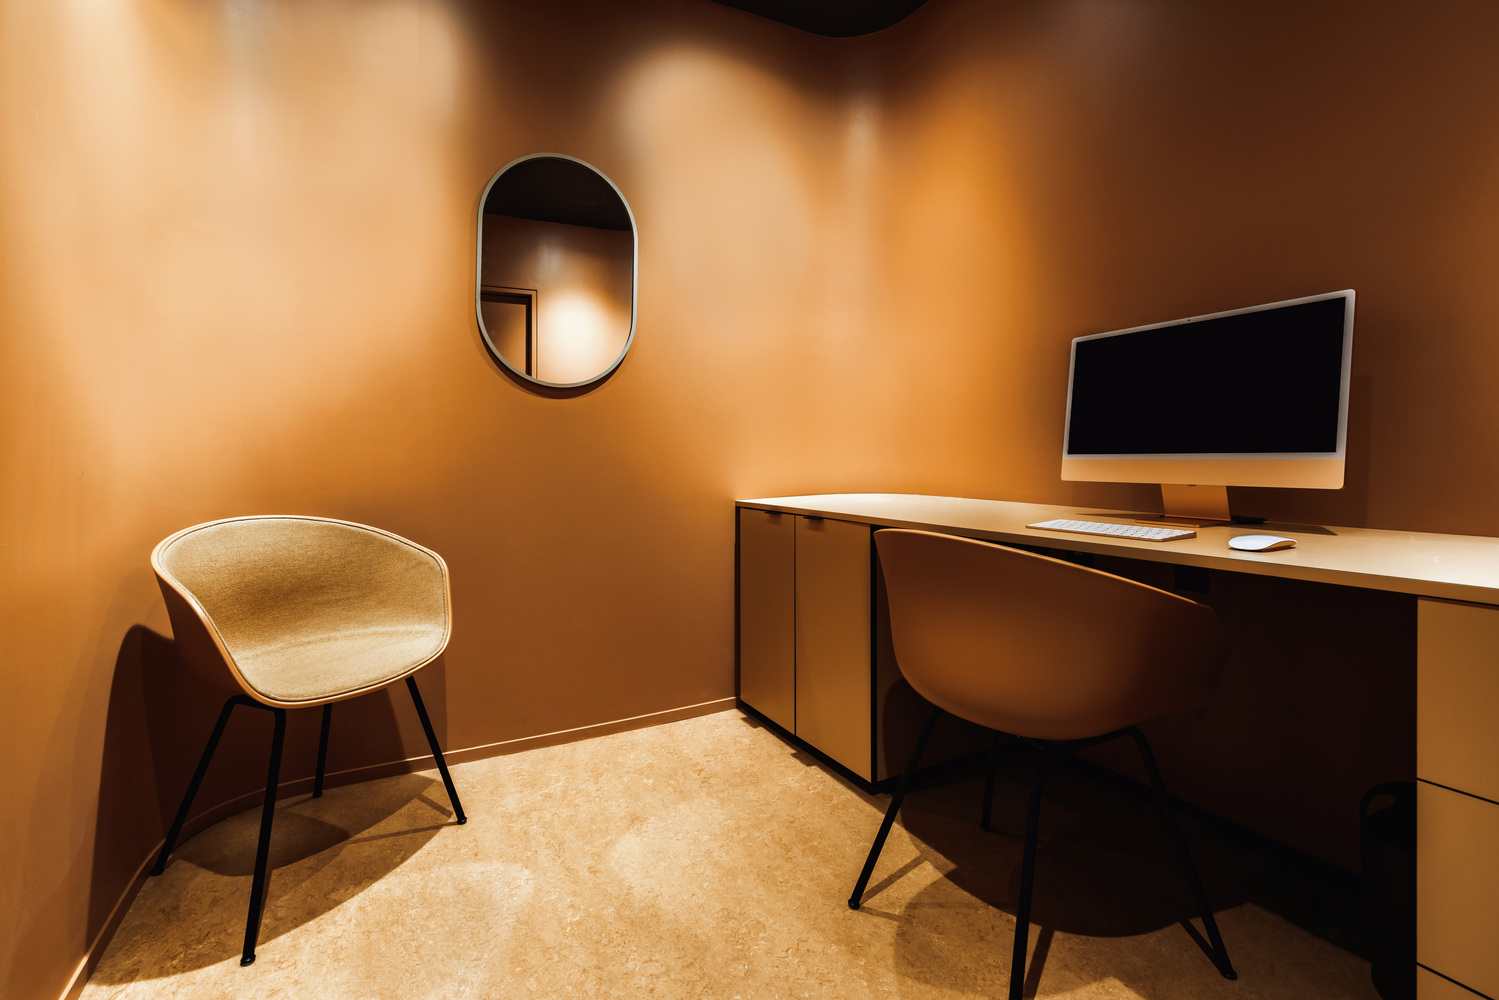 Beauty Edit Clinic office space with an orange color palette